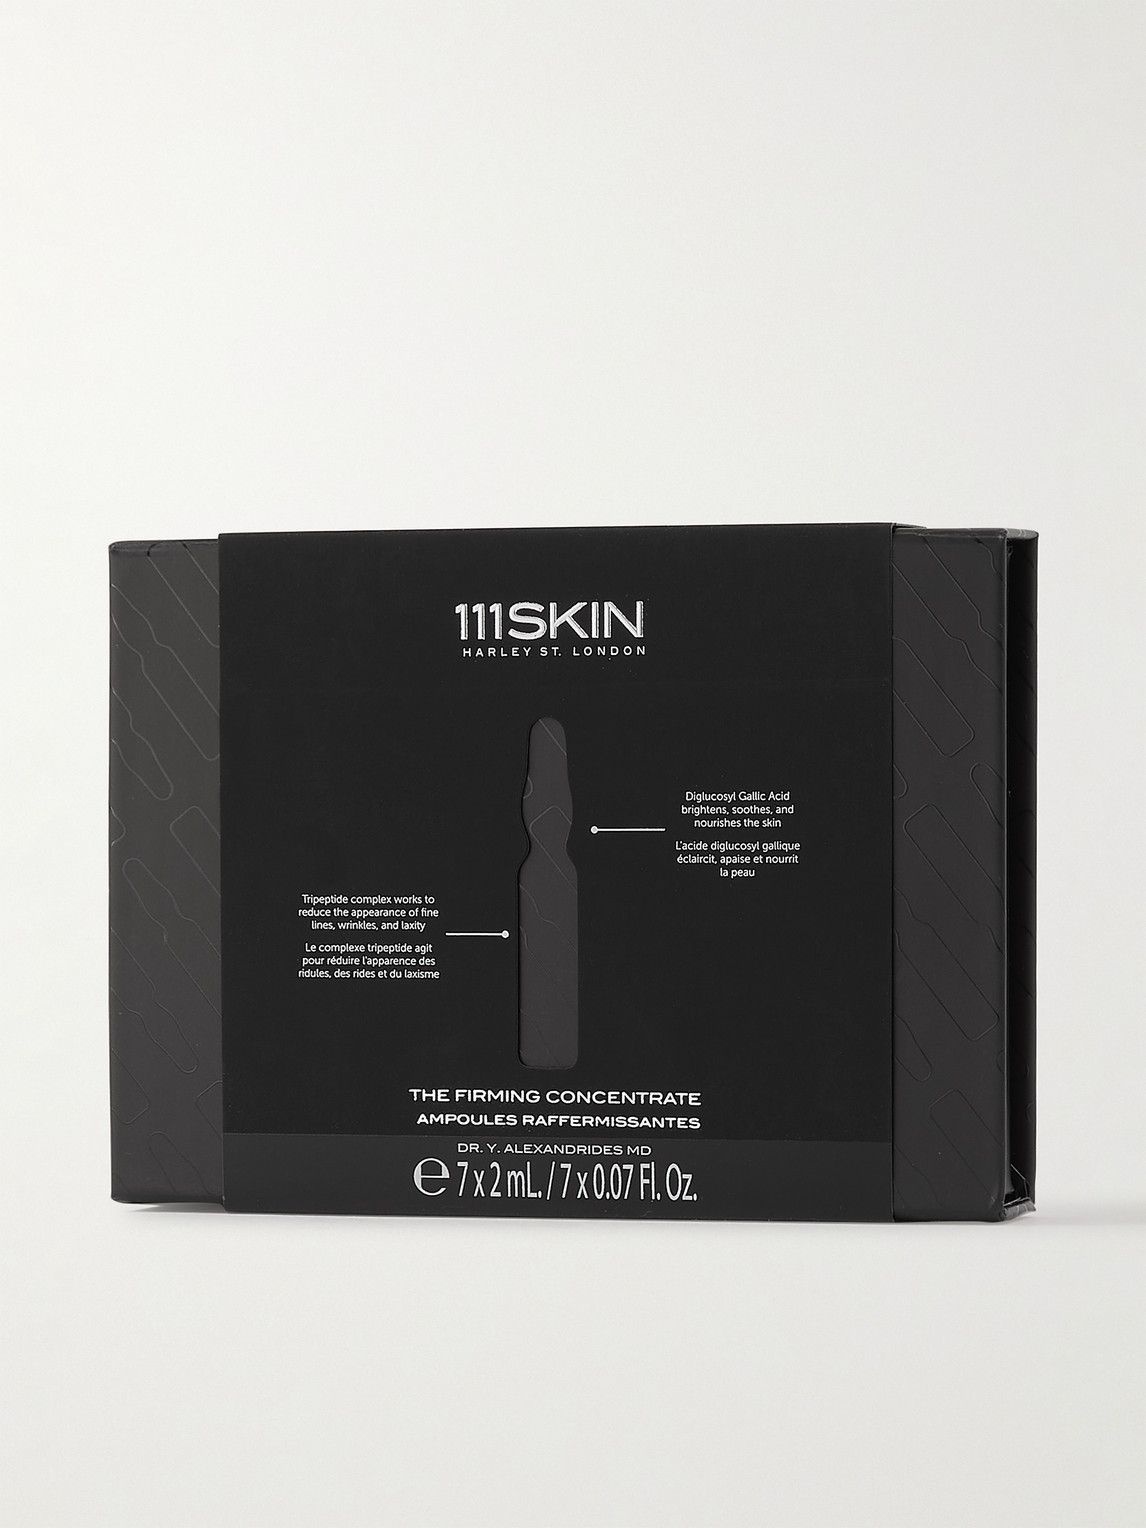 111Skin - The Firming Concentrate, 7 x 2ml